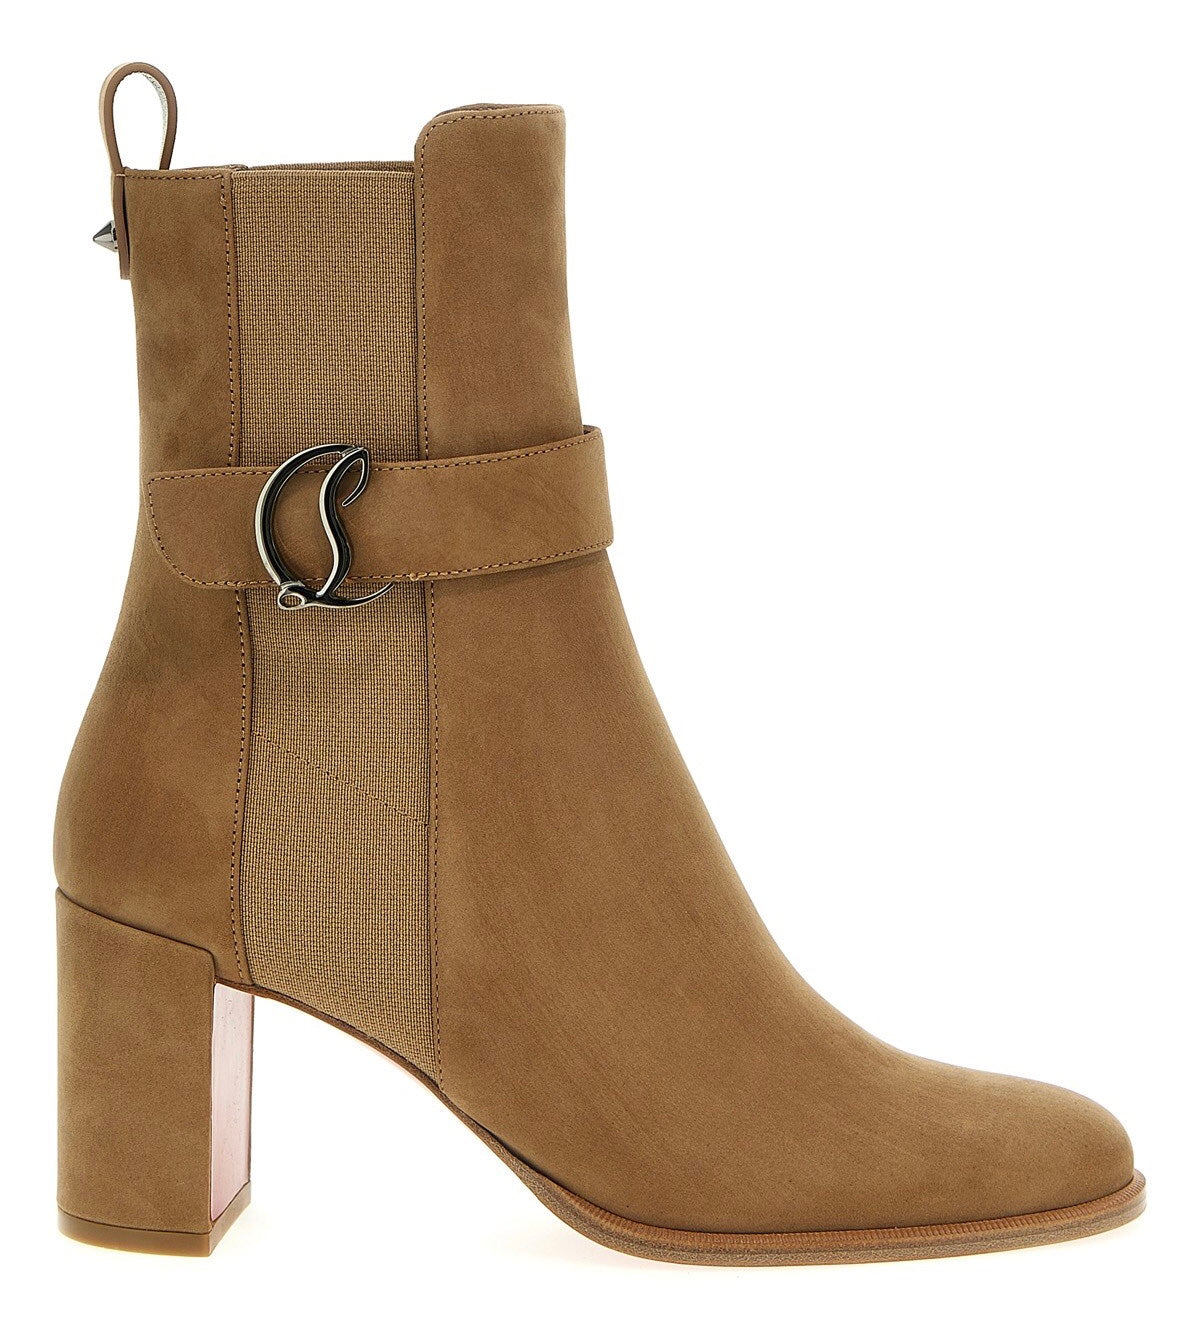 CHRISTIAN LOUBOUTIN CL LEATHER ANKLE BOOTS | JACQUESTINE BOUTIQUE